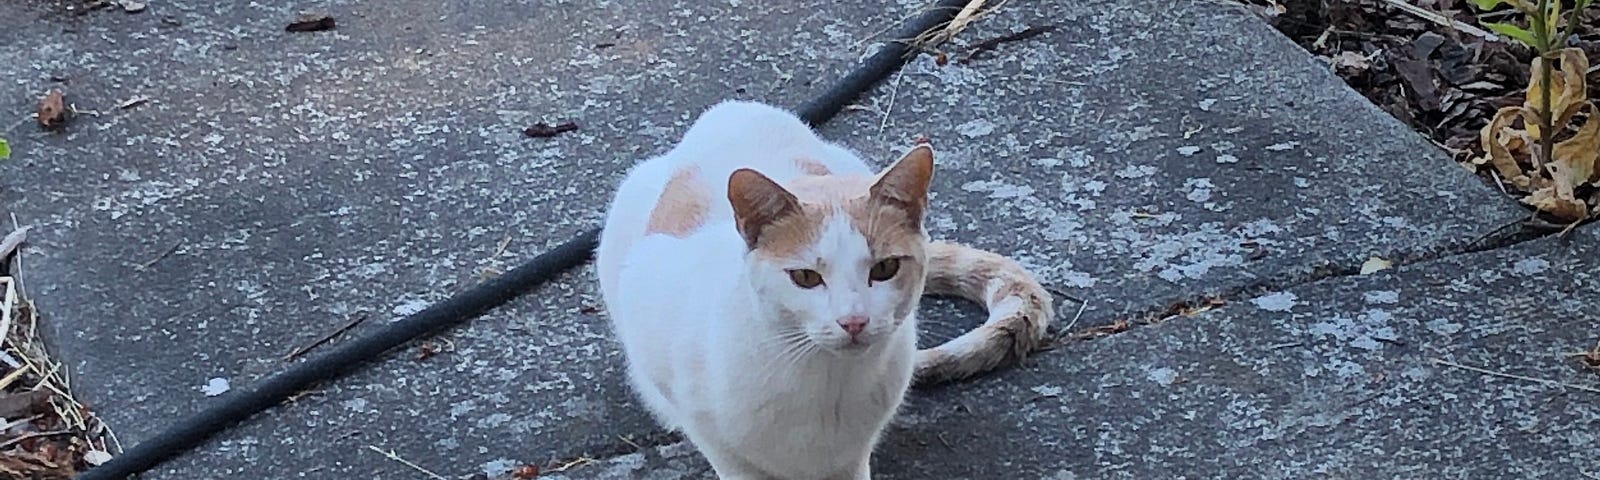 Picture of a stray cat that showed up today and reminded me that fate is unpredictable but fun.